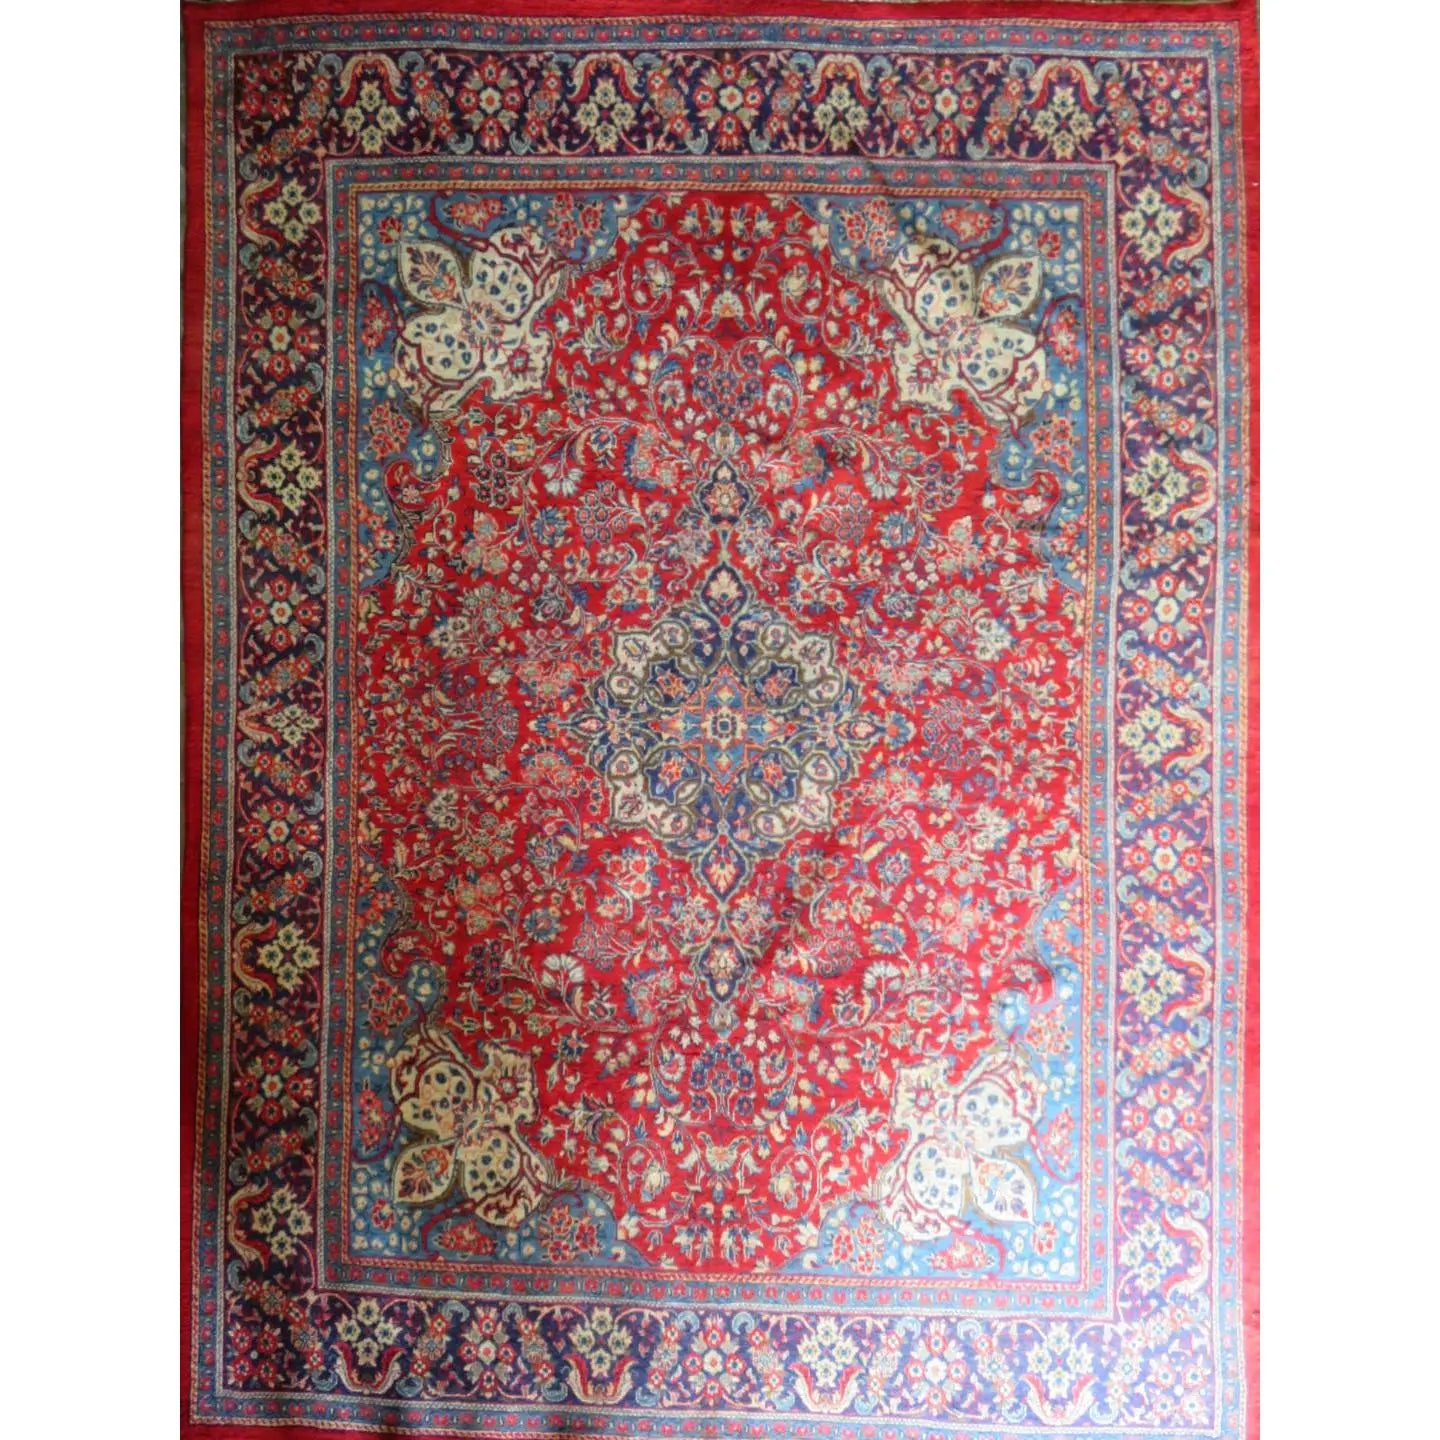 Hand-Knotted Persian Wool Rug – Luxurious Vintage Design, 13'4" x 10'0", Artisan Crafted